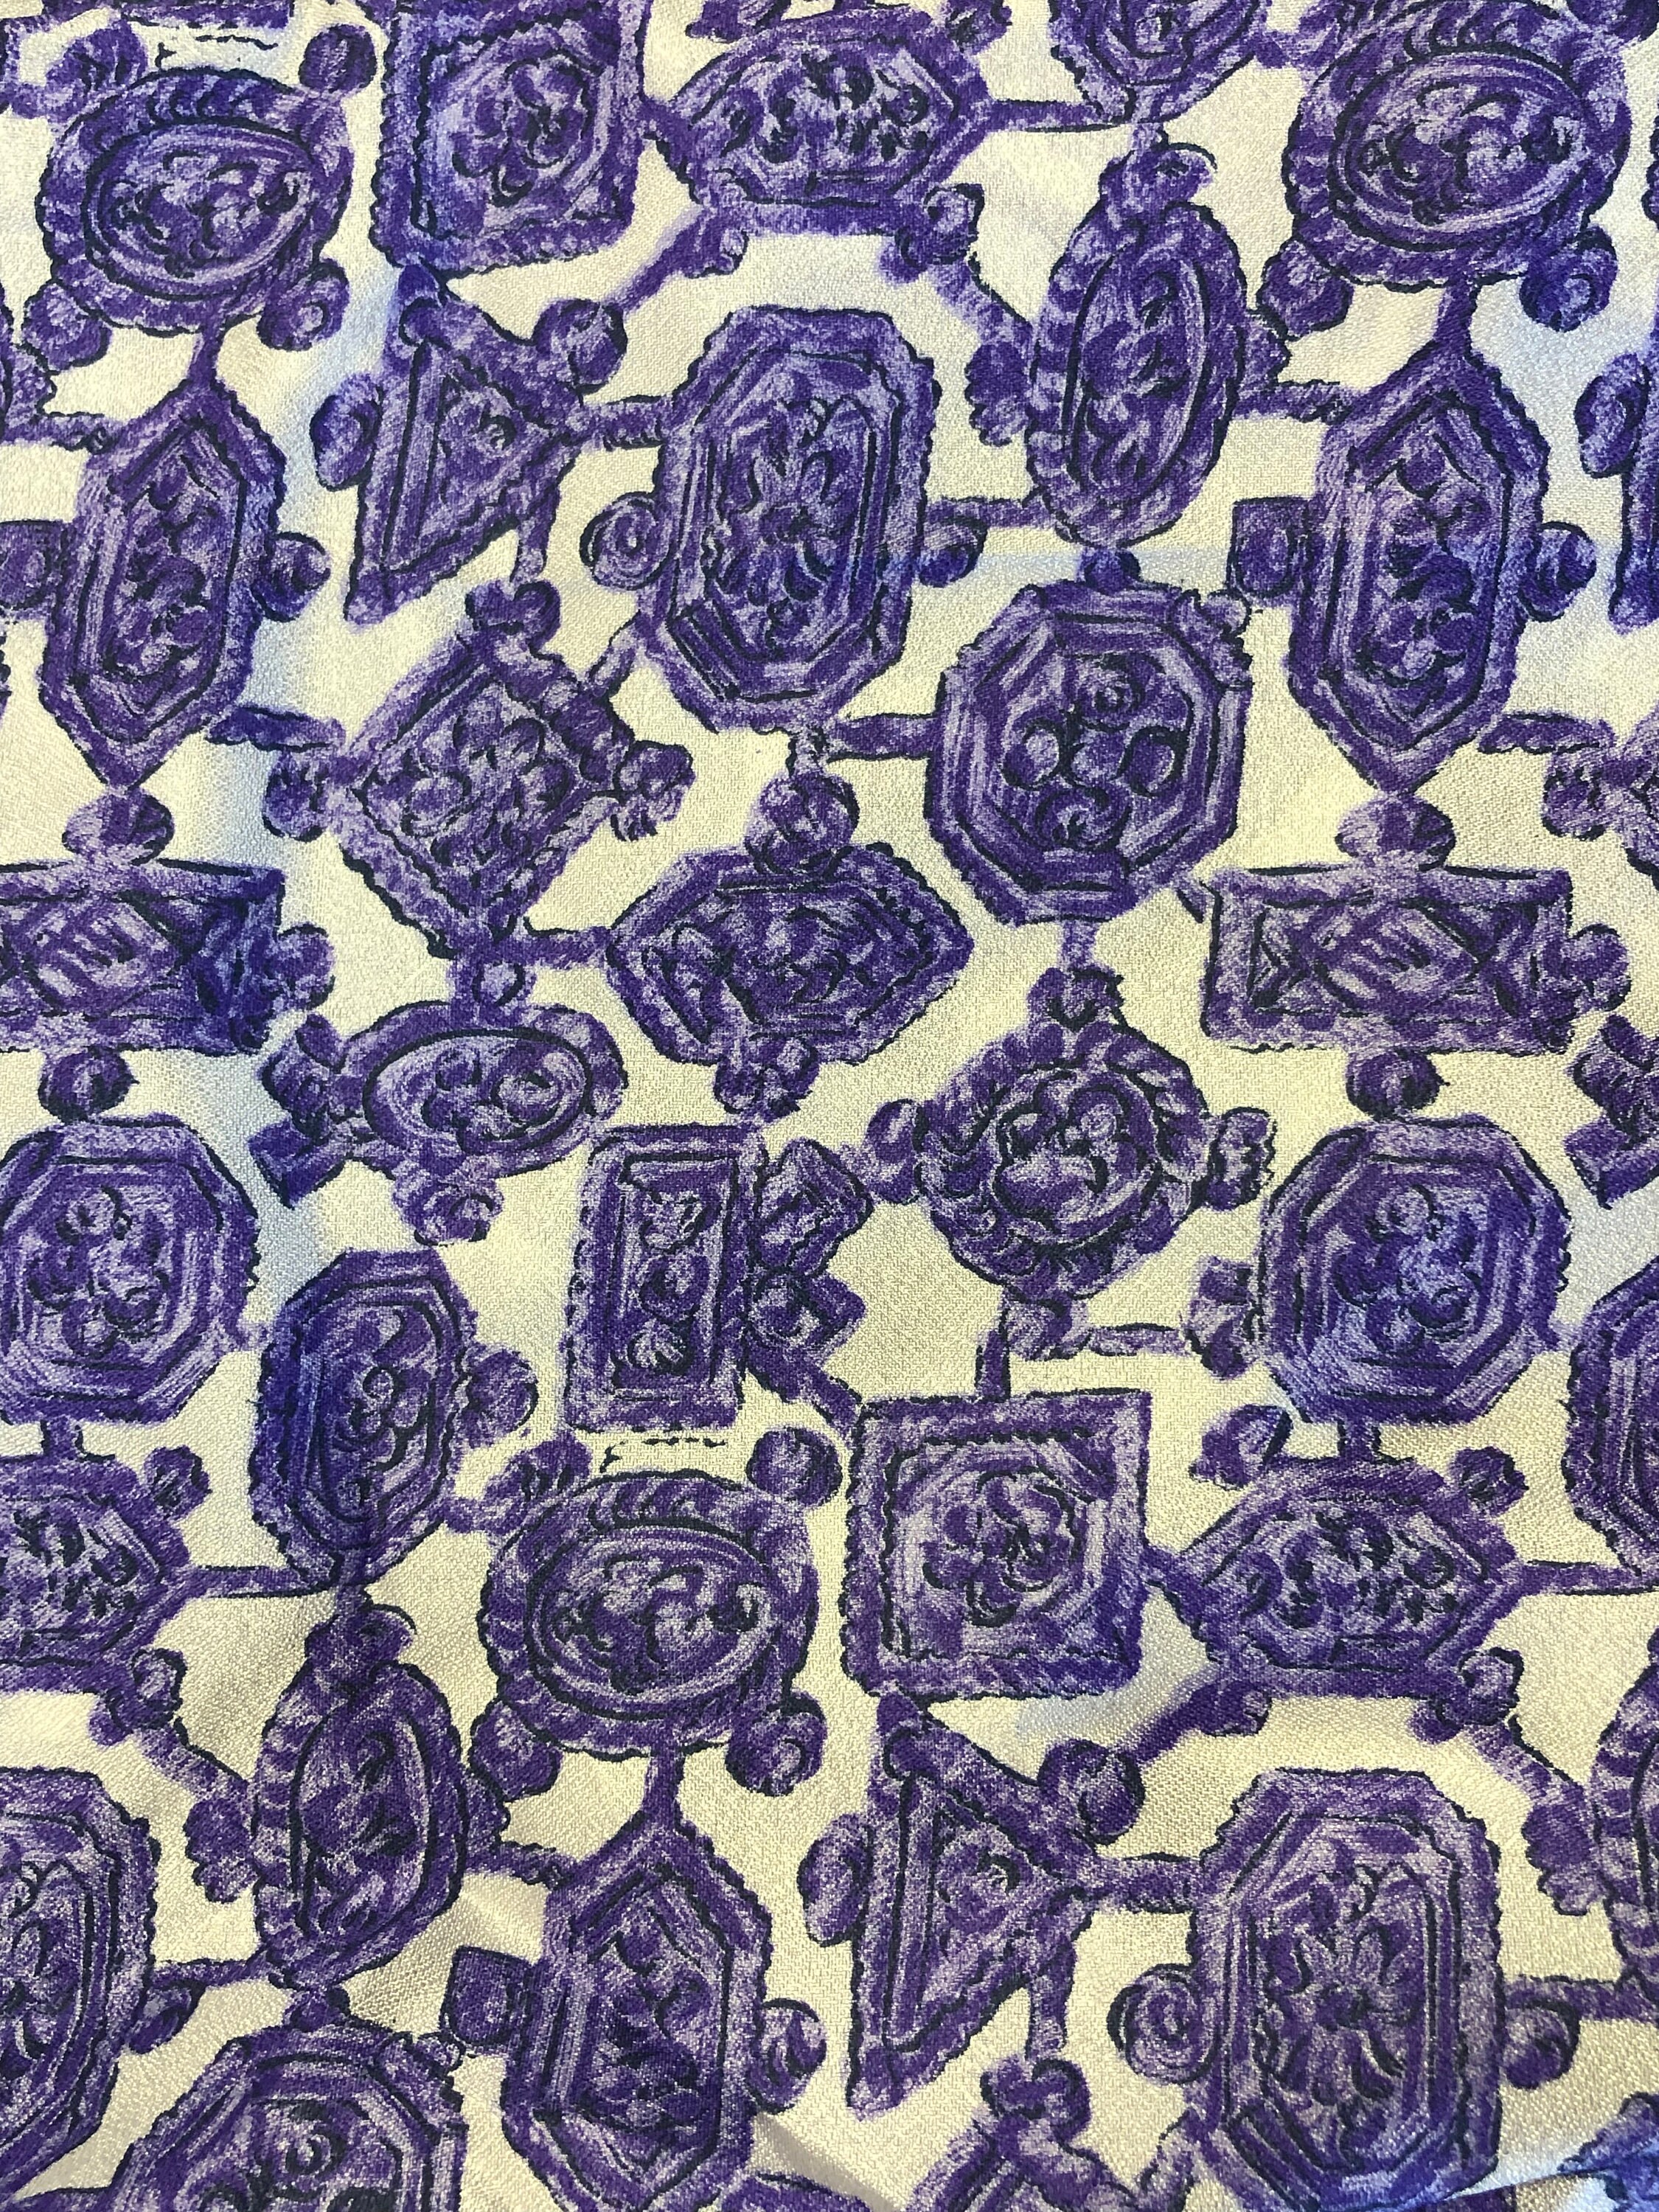 Vintage Purple & White Polyester Blend Shimmery Fabric, 45W X Price Per Yard; Blend Fabric, Purple Abstract Blouse Fabric